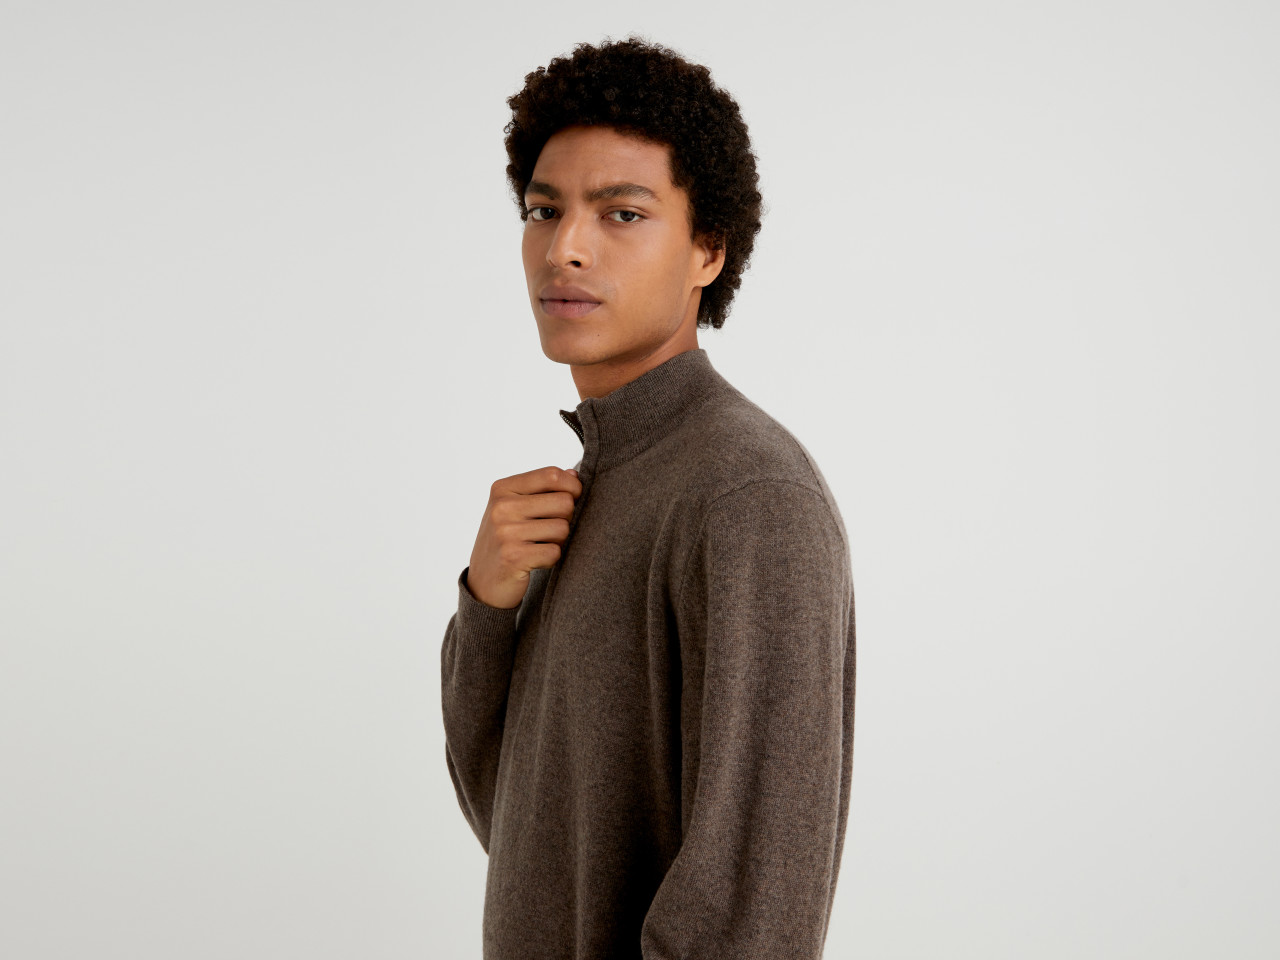 Mock-neck sweater in virgin wool and cotton